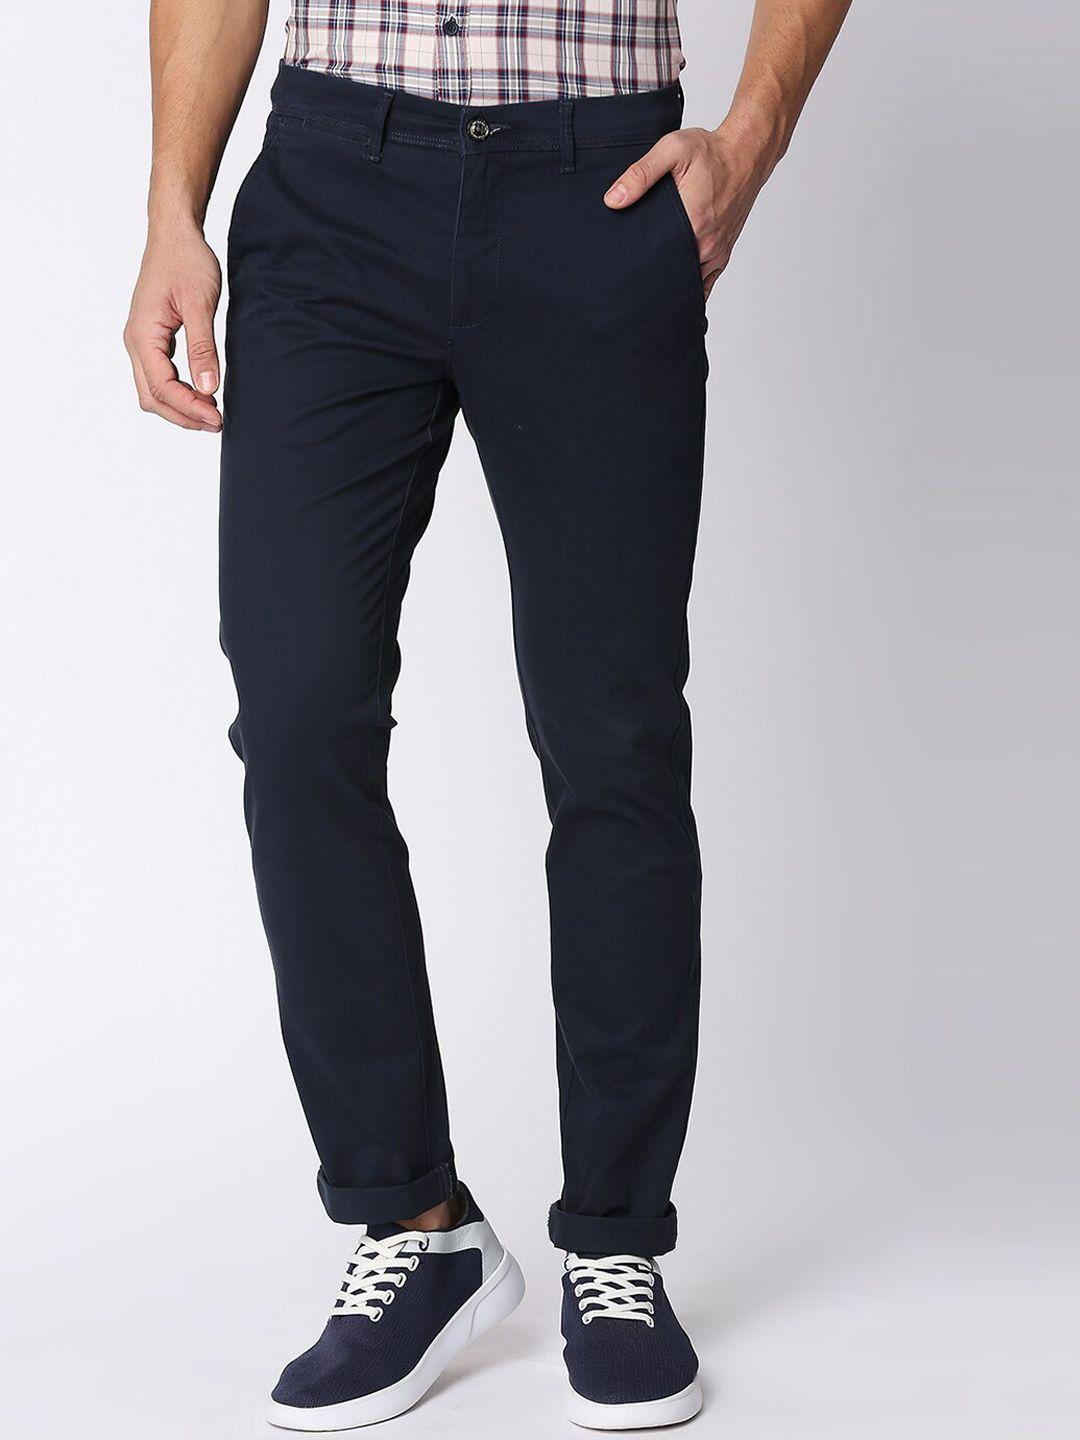 dragon-hill-men-mid-rise-slim-fit-cotton-chinos-trousers